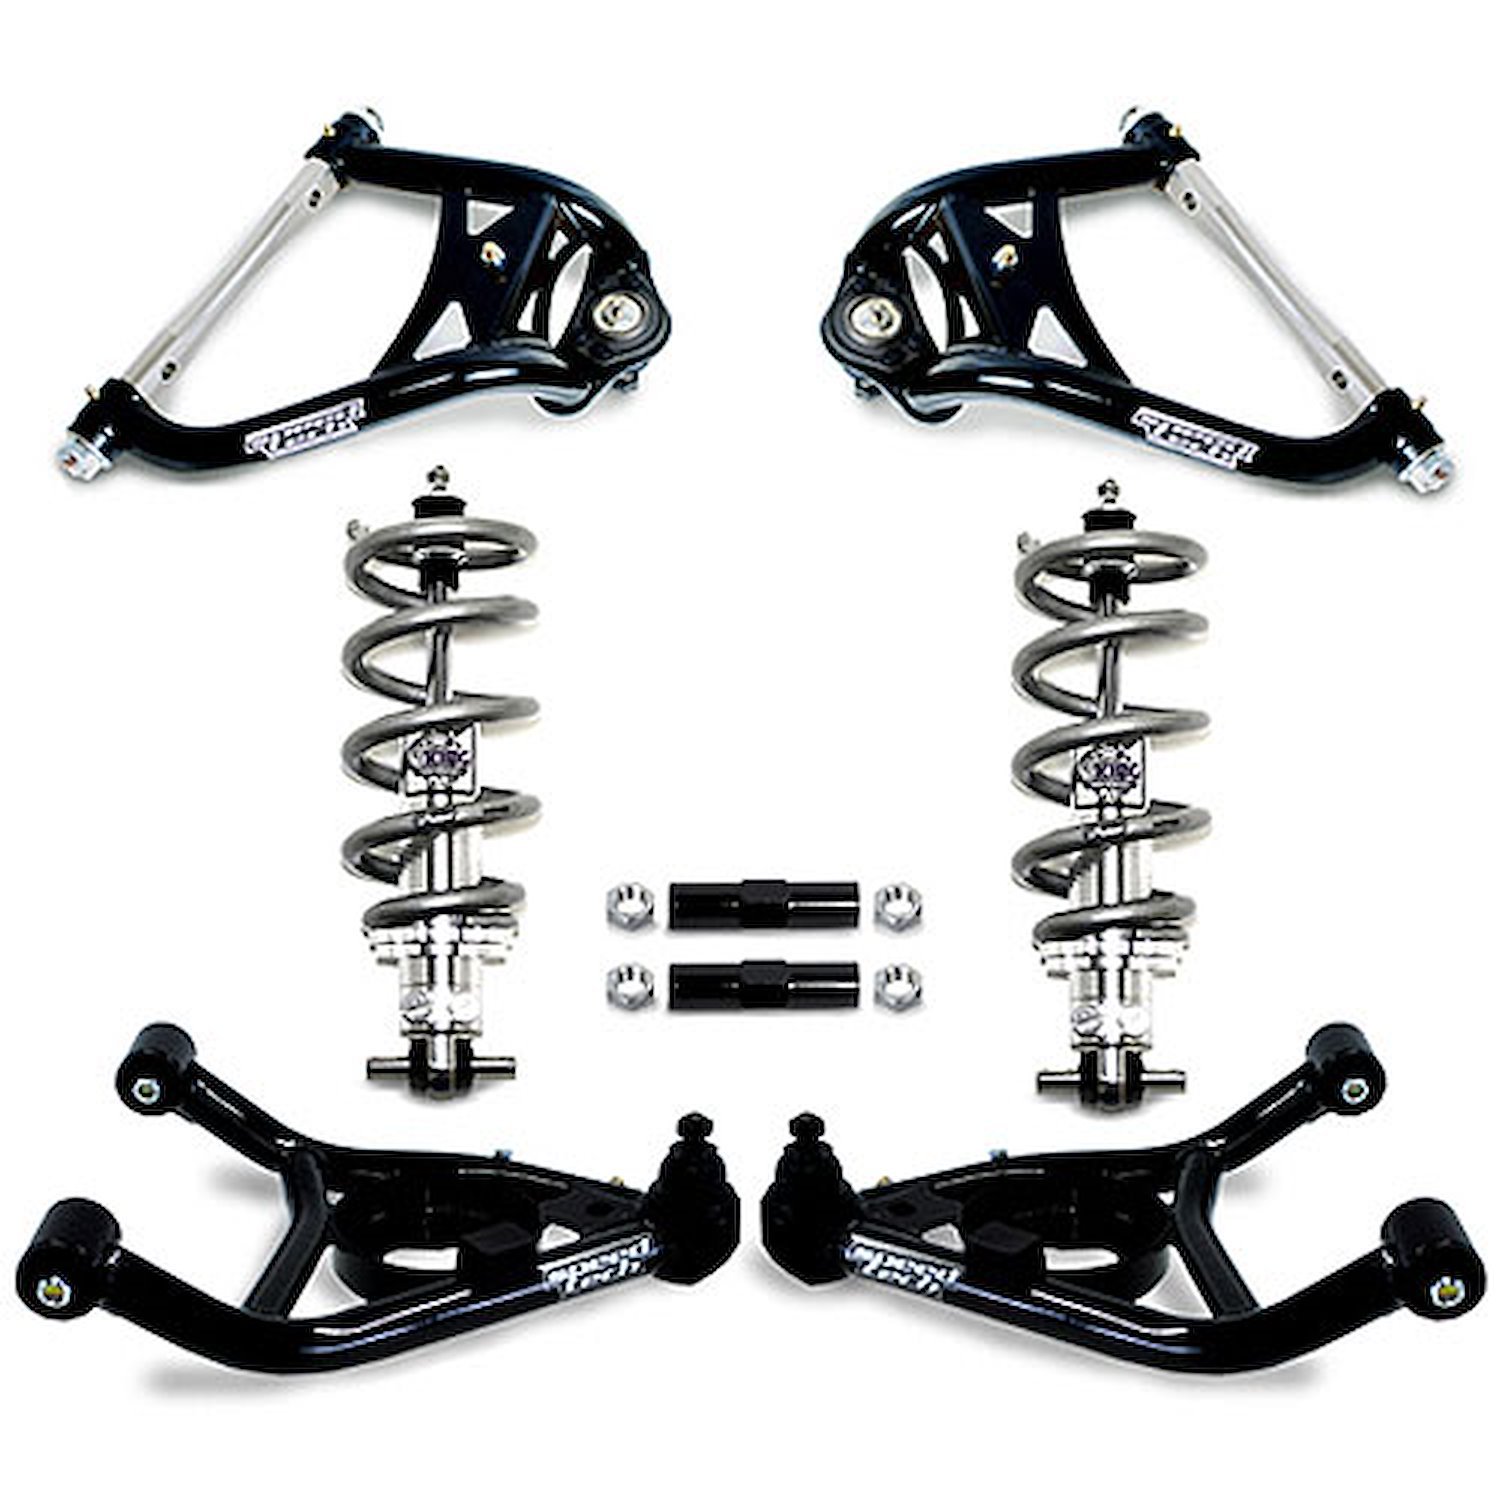 Pro Touring Front Suspension Package 1967-69 Camaro / 1968-74 Nova with Big Block Engine